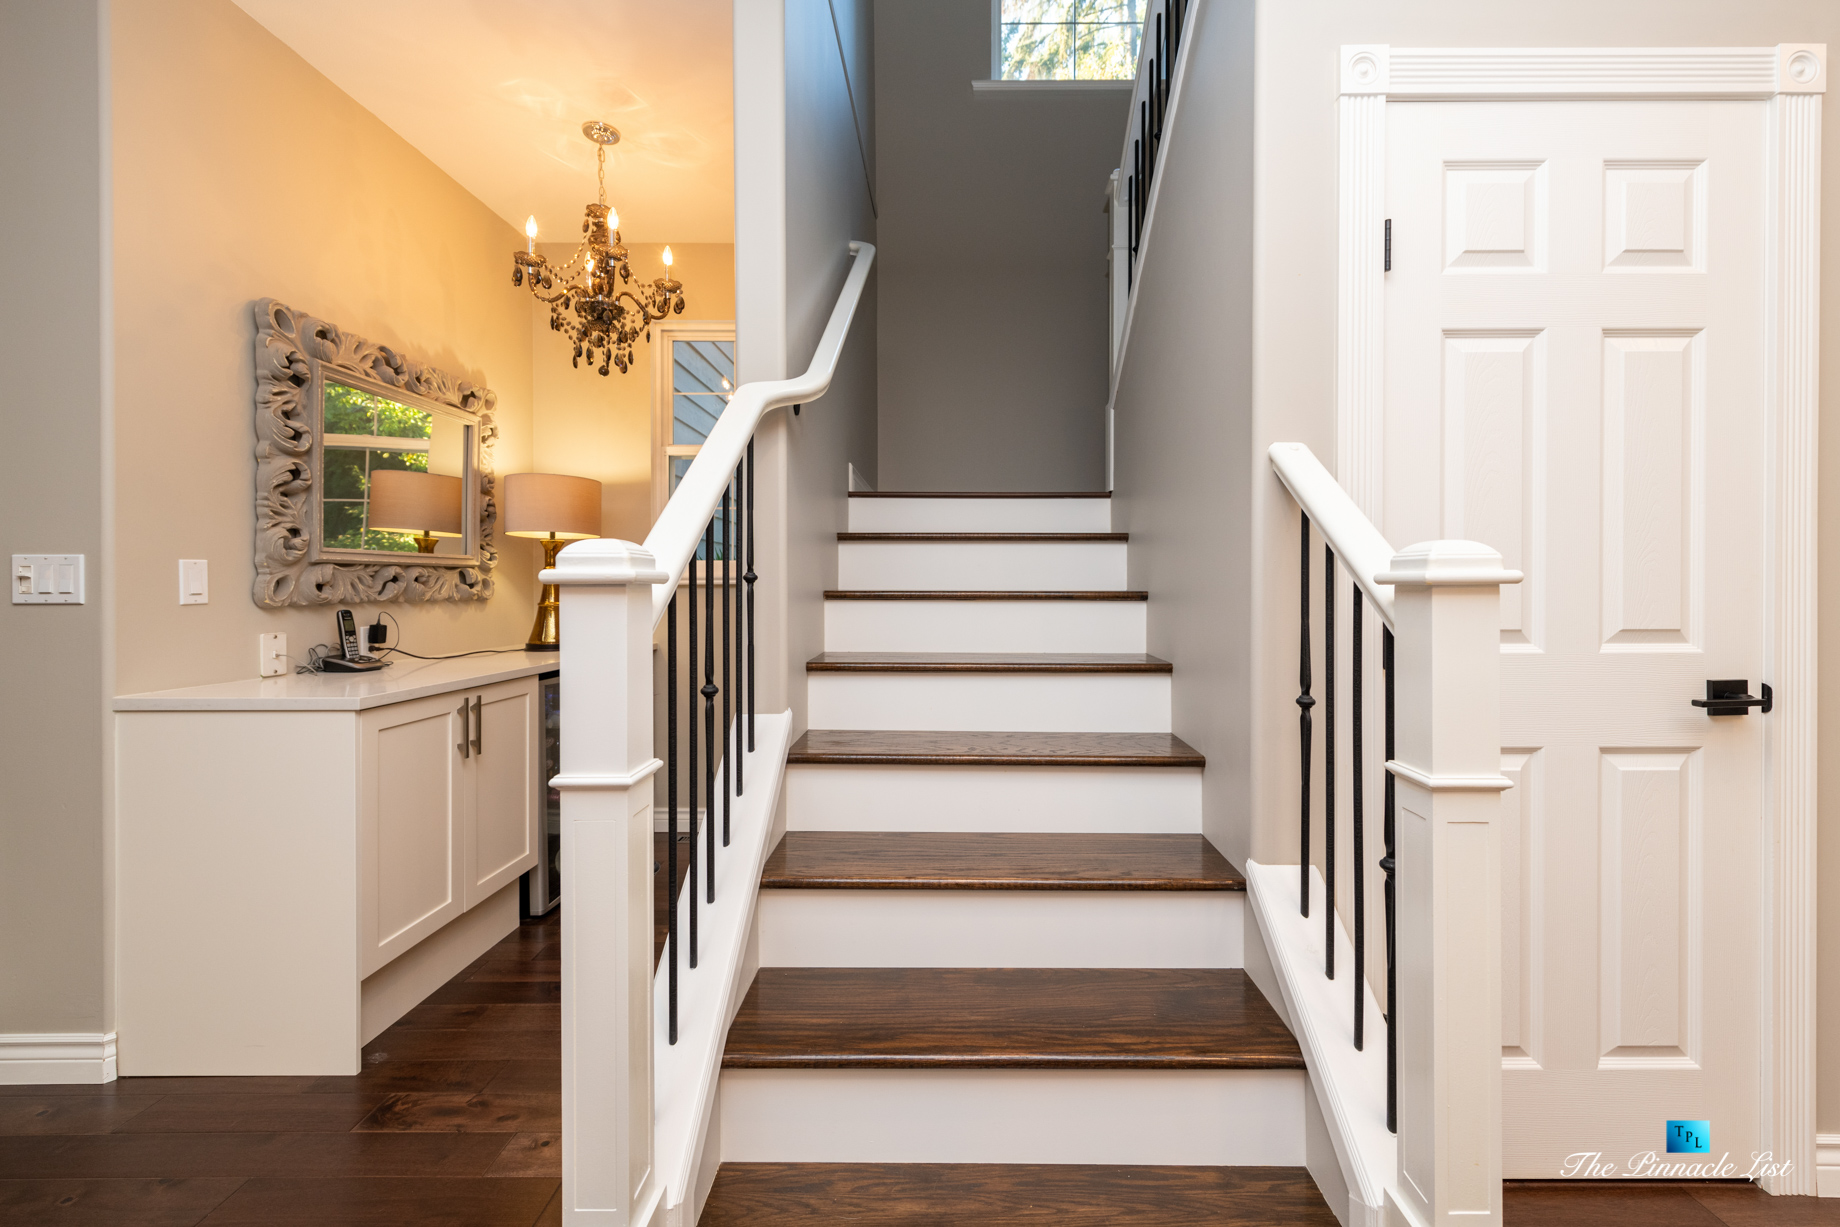 2366 Sunnyside Rd, Anmore, BC, Canada - Kitchen Stairs